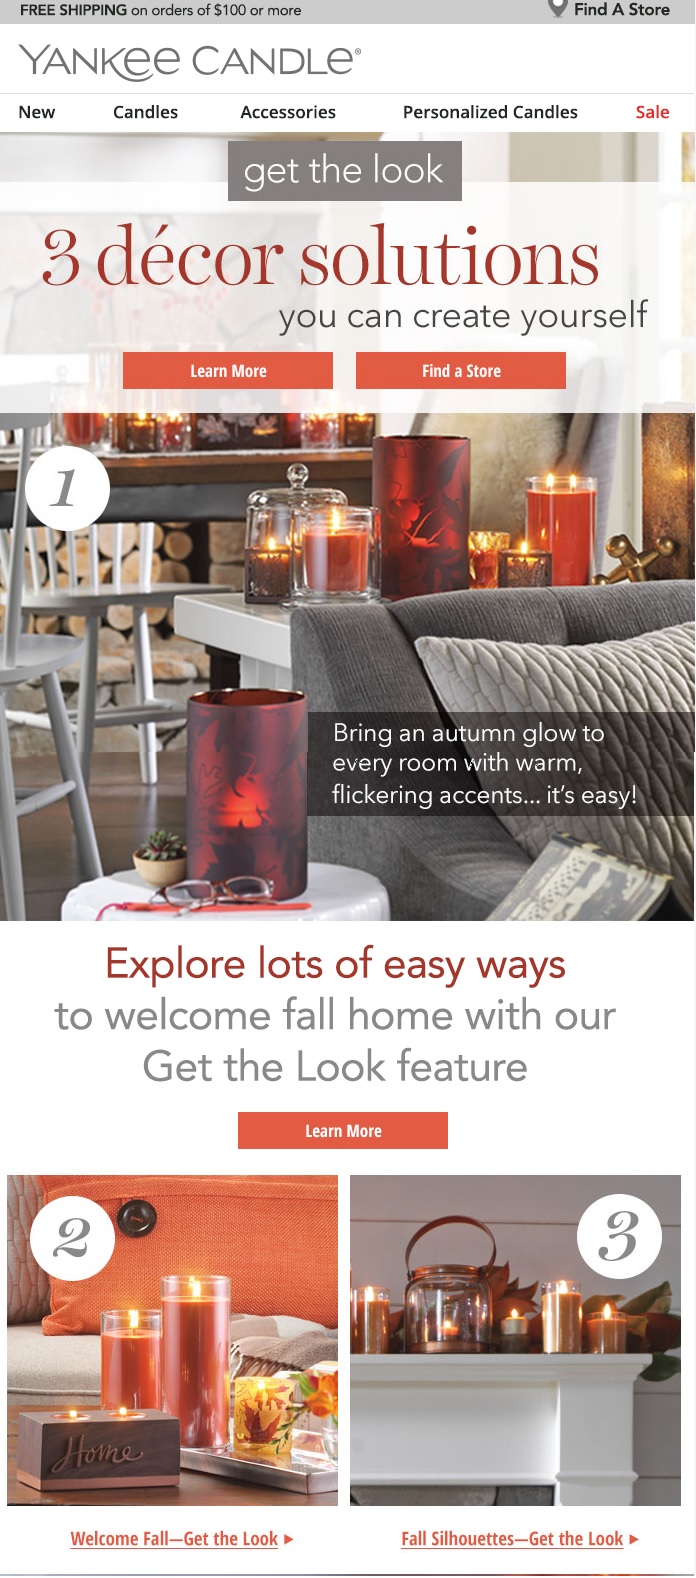 Yankee Candle recently changed its logo and email artwork for the fall and holiday seasons.